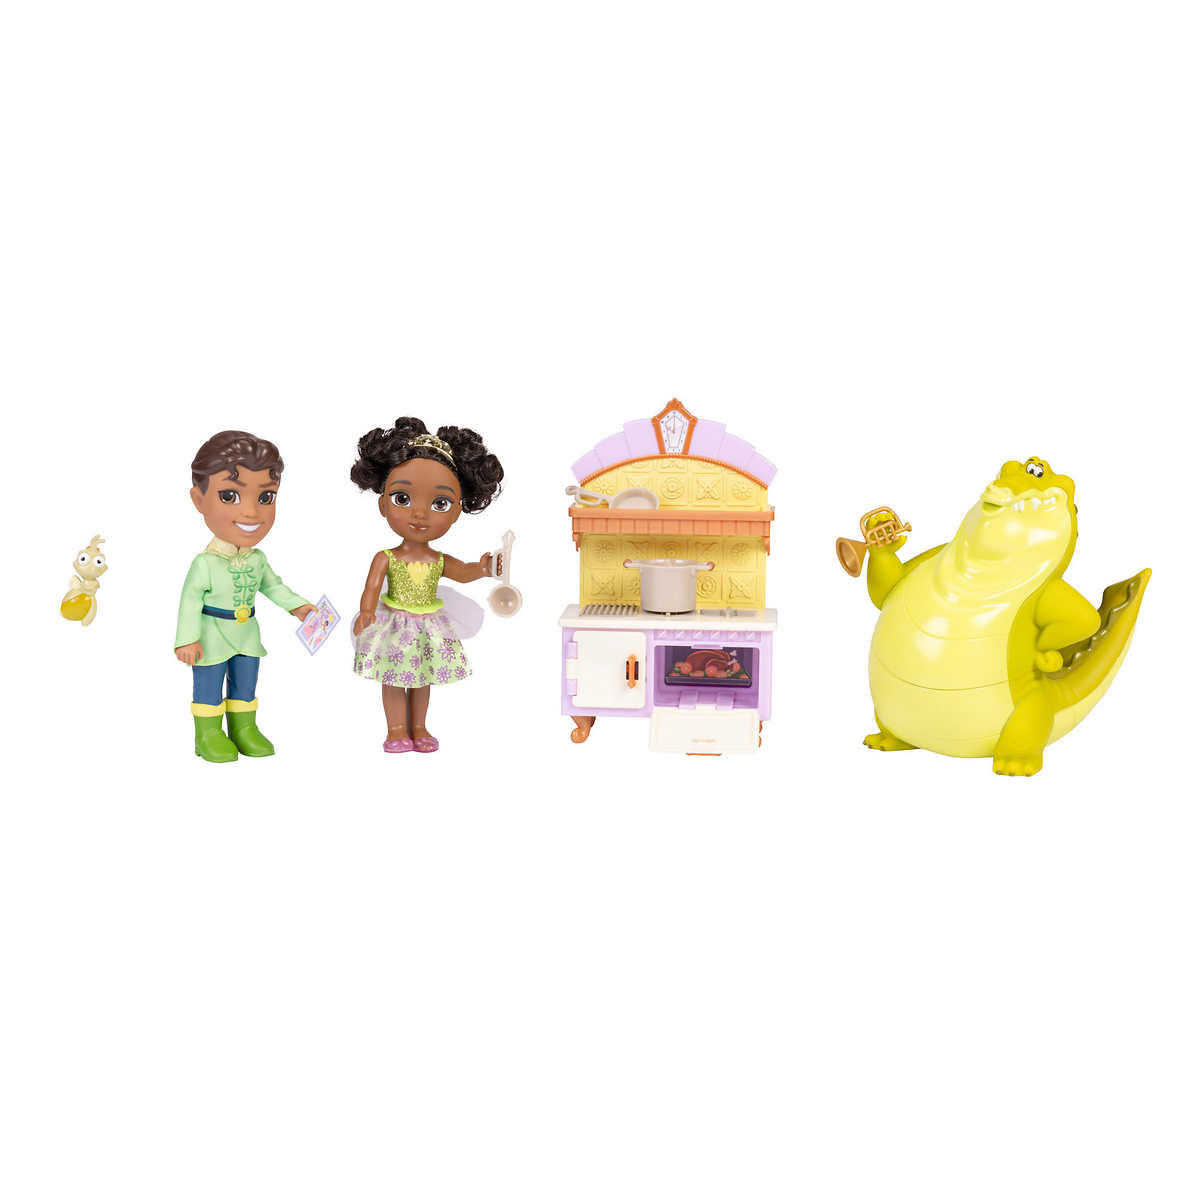 Disney Princess Storage & Containers for Kids